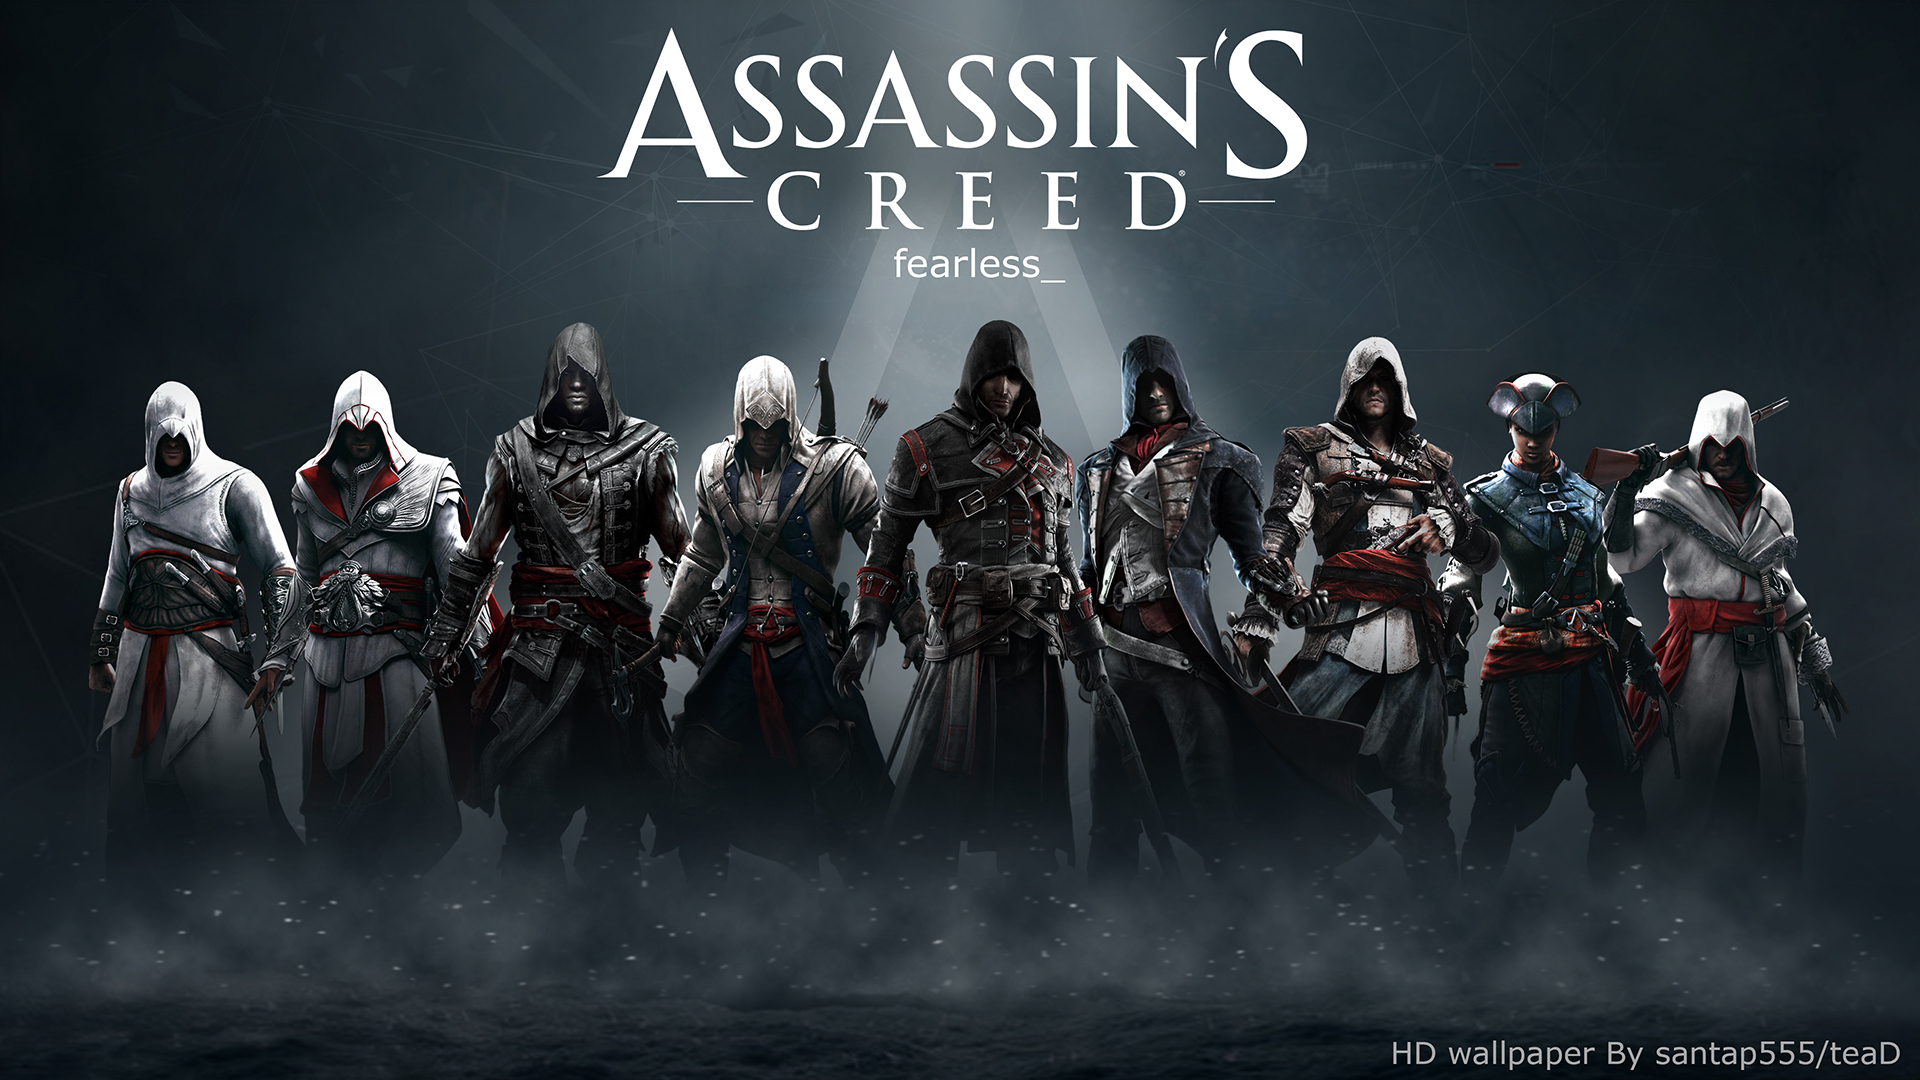 Assassin S Creed HD Wallpaper By Tead Santap555 On